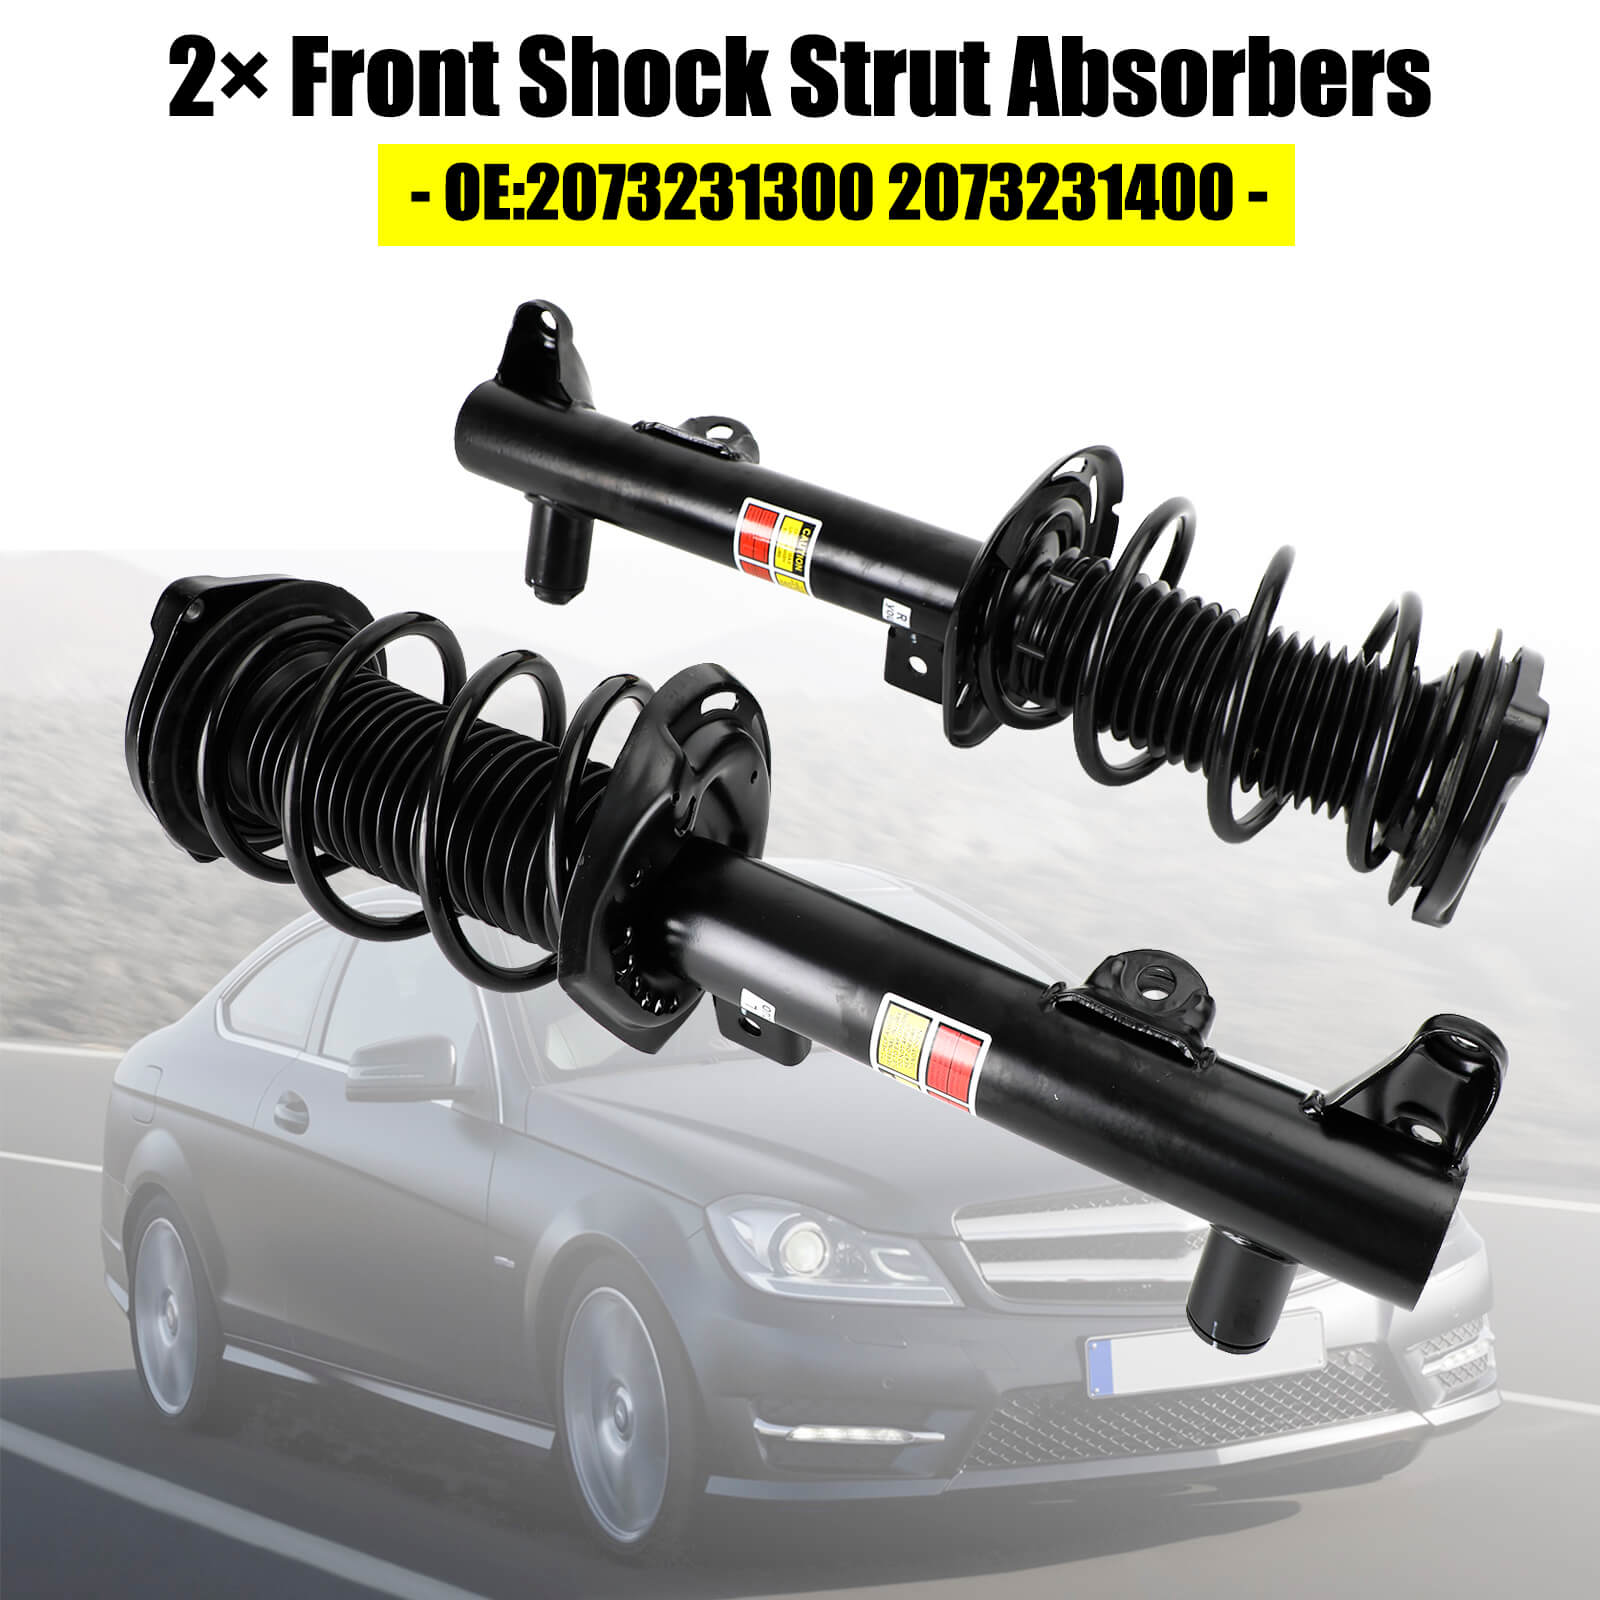 09-16 Mercedes Benz E-Class Coupe (C207) Front Shock Strut Absorbers 2073231300 2073231400